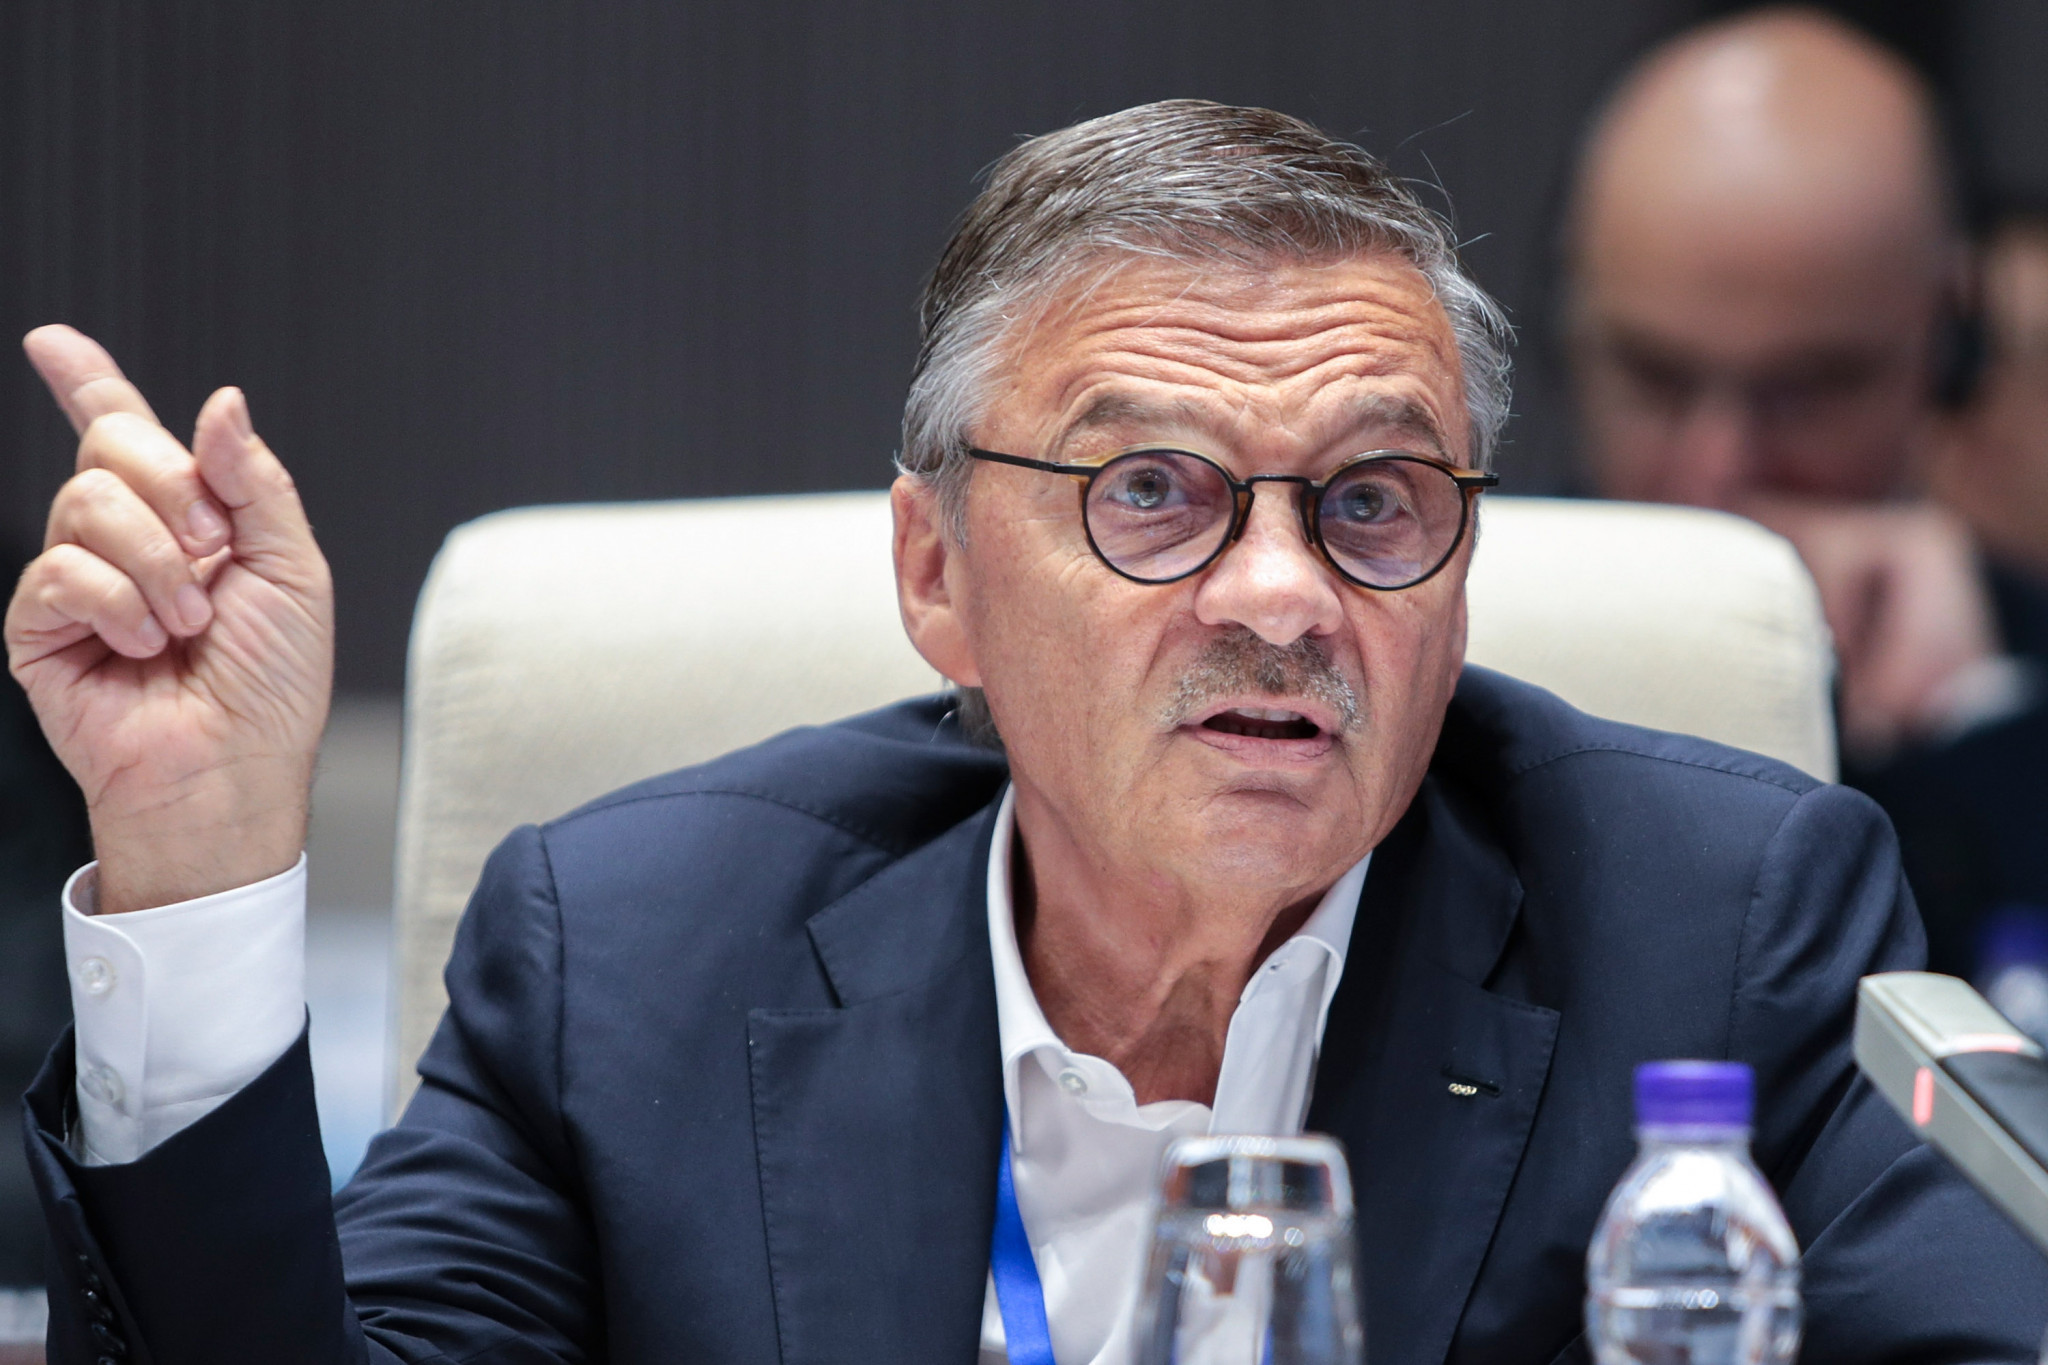 IIHF President René Fasel said the IIHF was expecting a decision from the NHL in August ©Getty Images